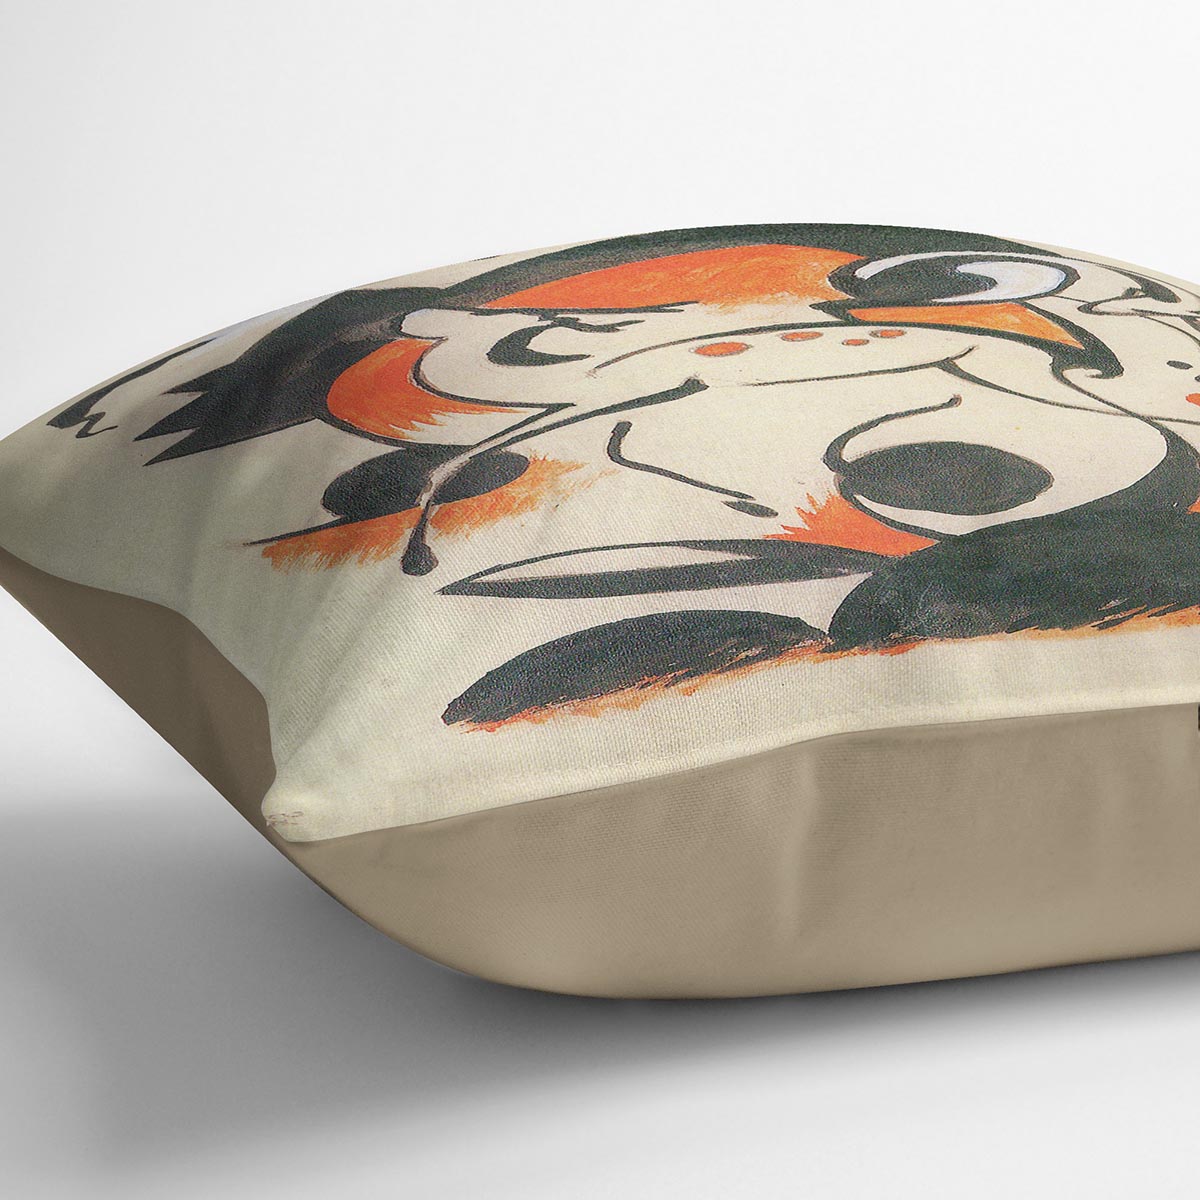 Composition with two deer by Franz Marc Cushion